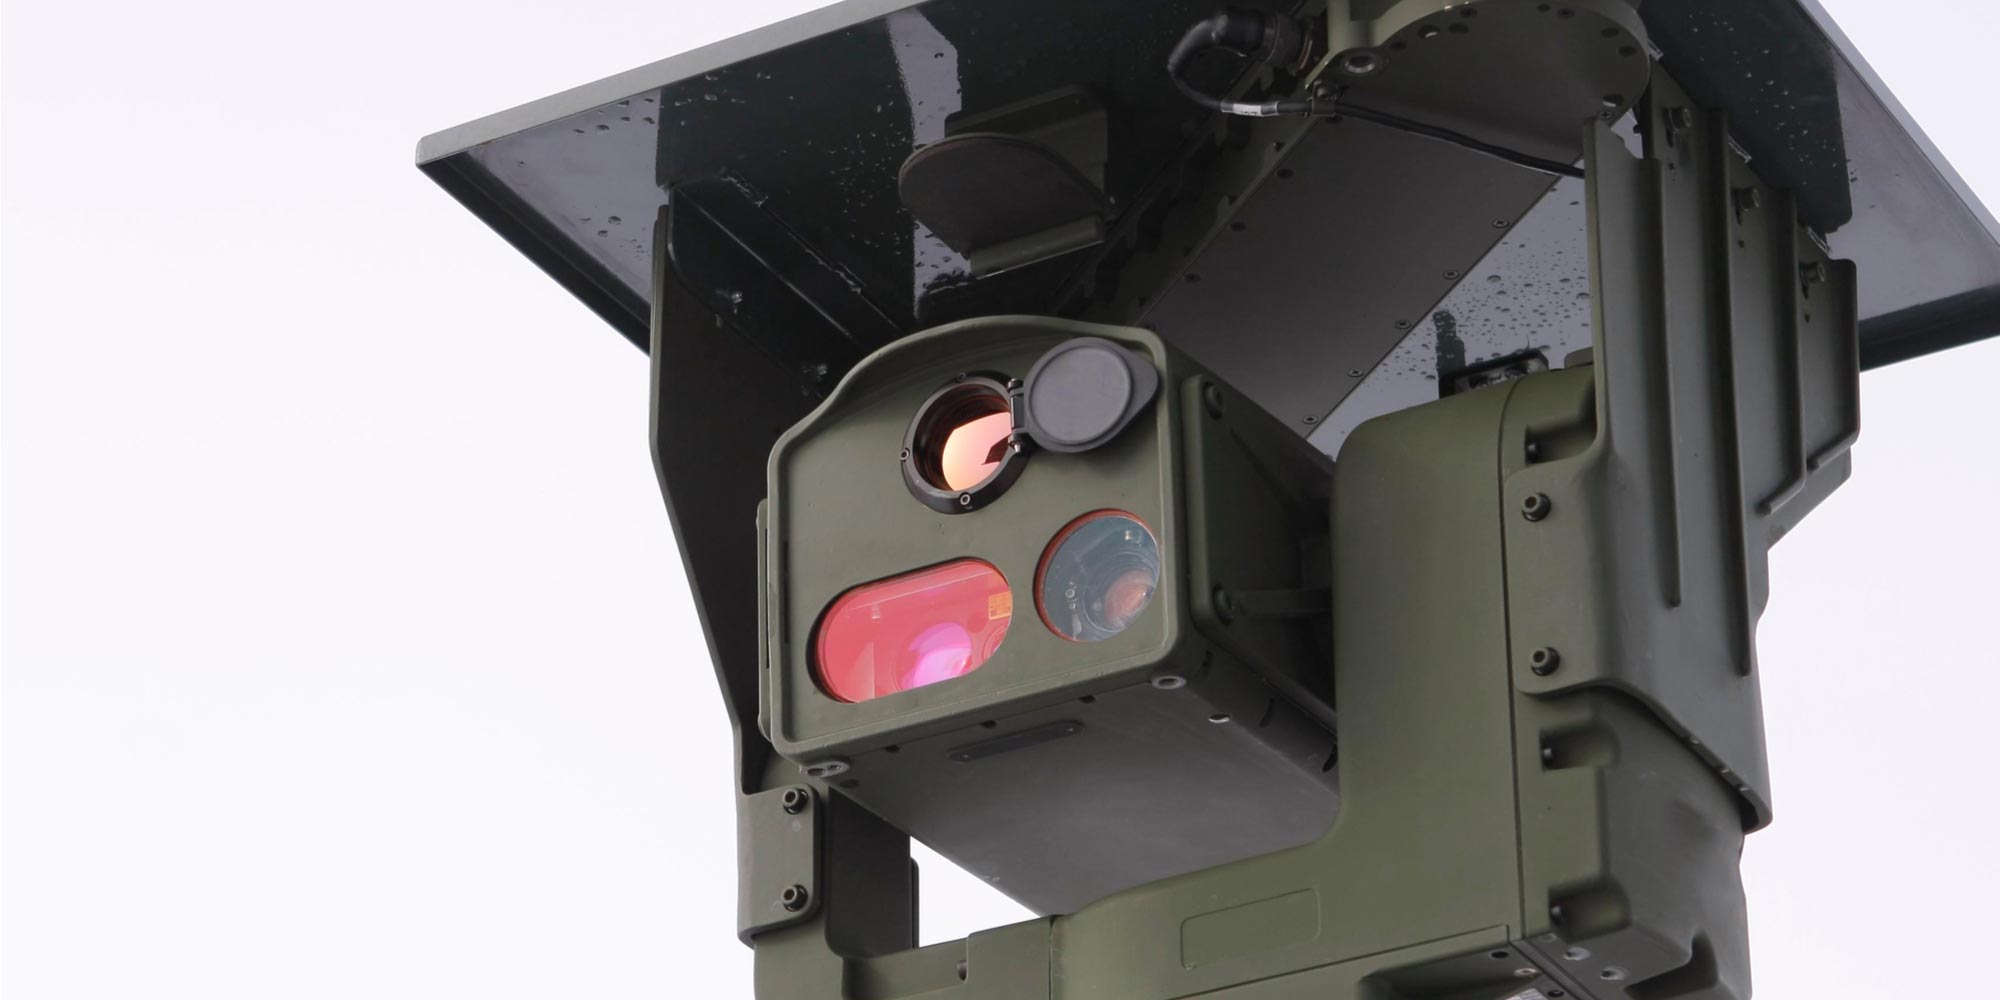 MWIR or LWIR thermal cameras for surveillance applications?